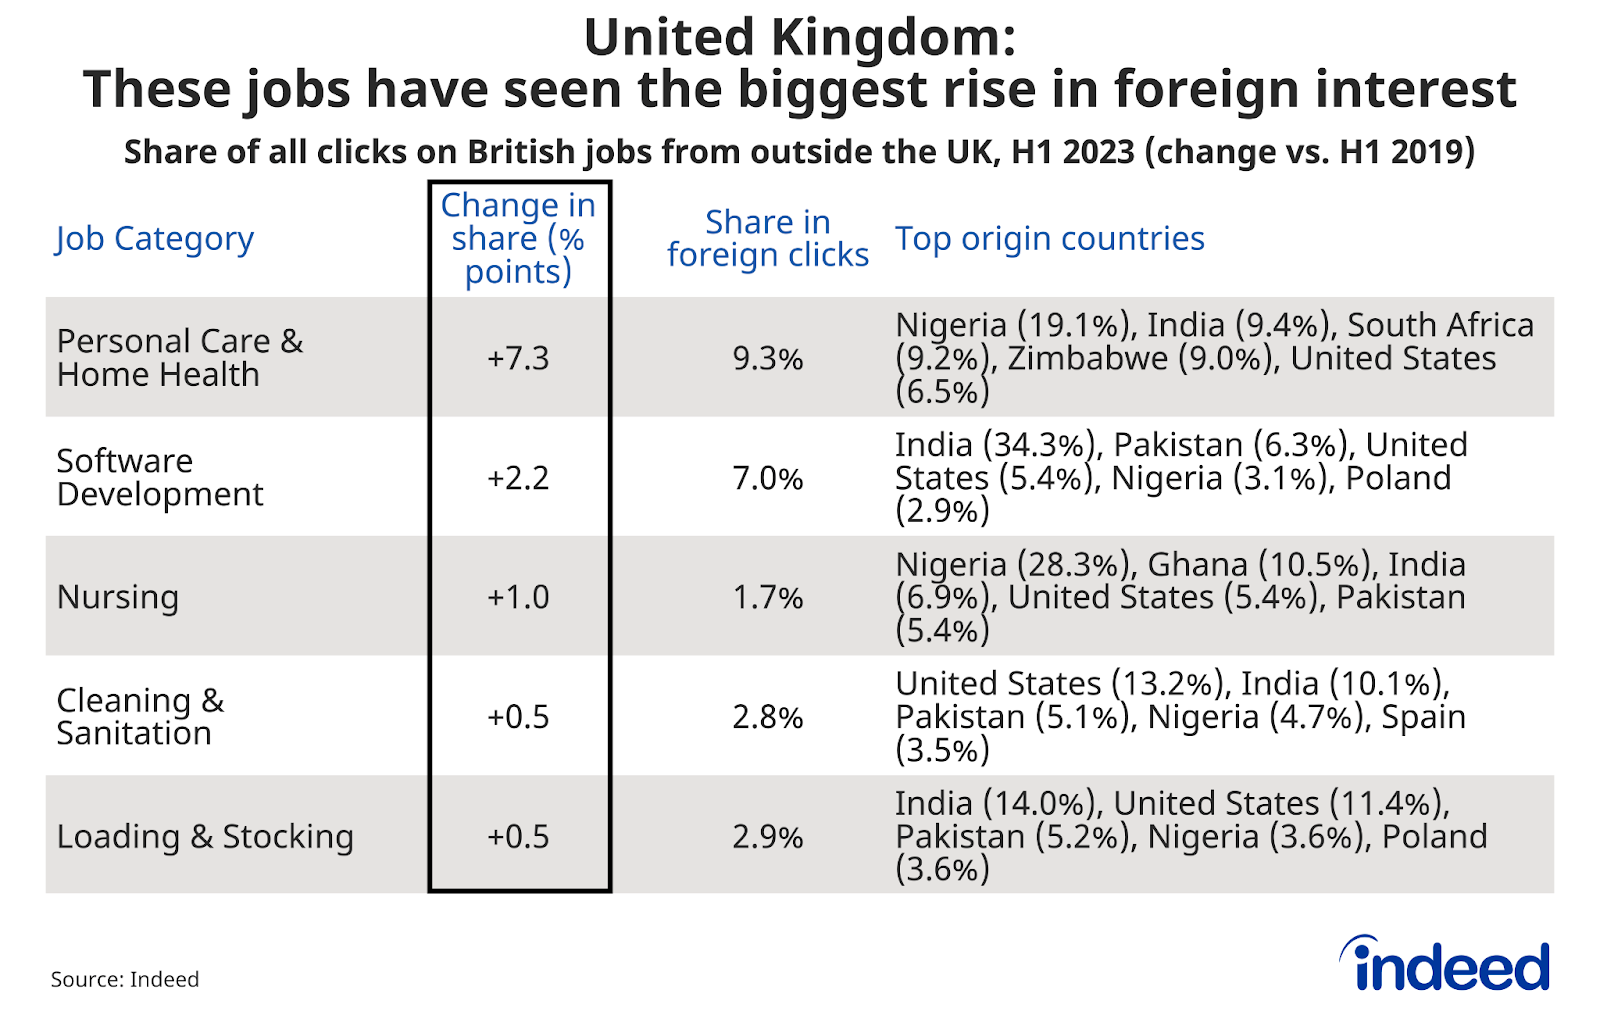 Table titled "European Union: These jobs have seen the biggest rise in foreign interest" tracking the change from H1 2019 to H1 2023 in the share of all clicks on EU jobs from outside the EU. Software Development has the greatest increase at +1.8 change, while Nursing had the smallest at +0.5 percentage points. 